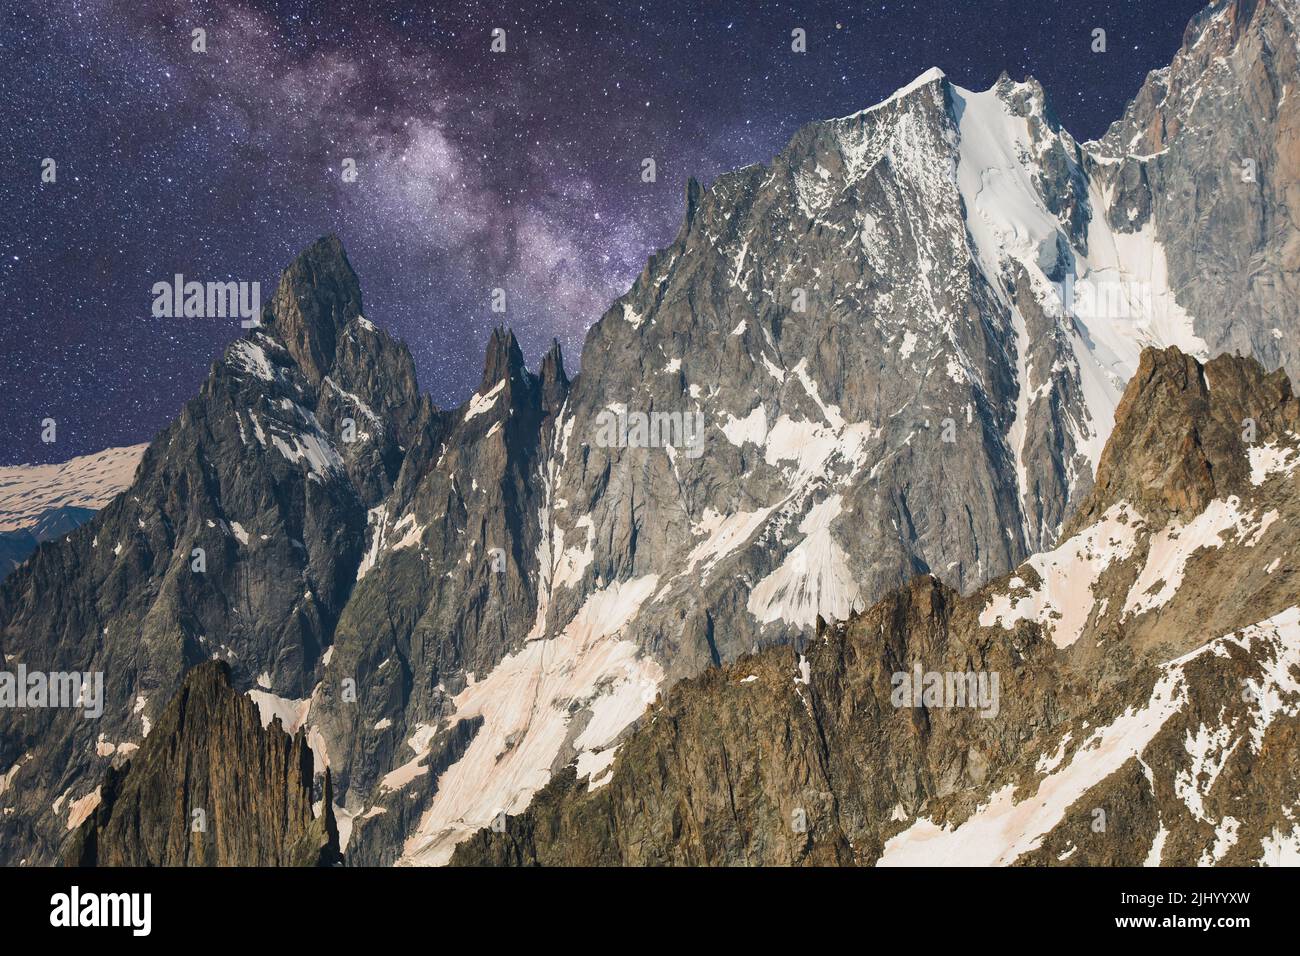 Alpine landscape with night sky and milky way over Pointe Helbronner of the Massif of Mont Blanc, France Stock Photo